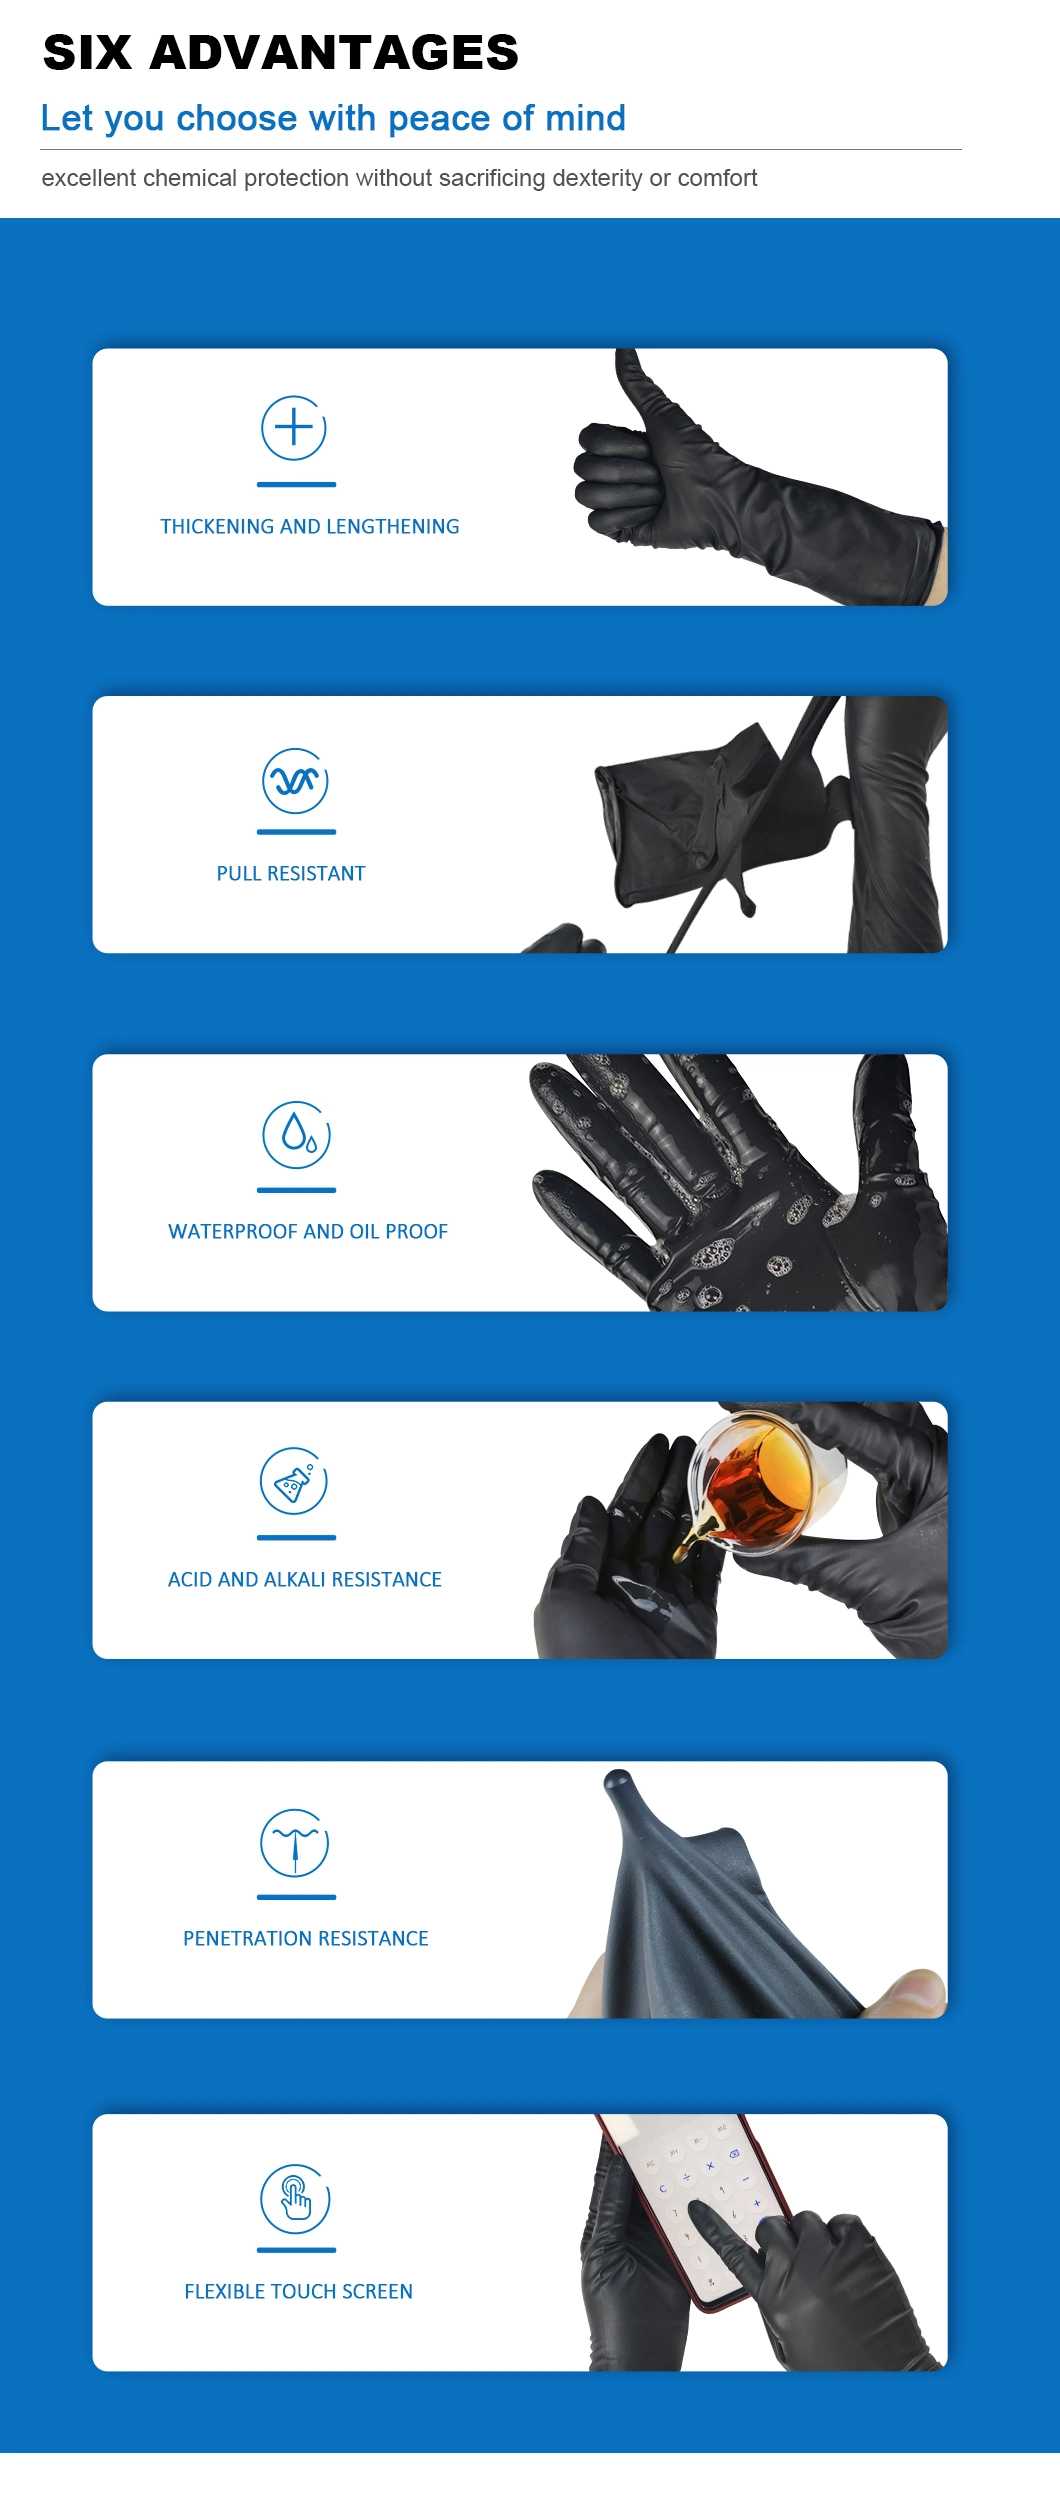 Gusiie 12-Inch Long Glove, Disposable Black Powder Free Chemical Rubber Glove, Safety Nitrile Gloves